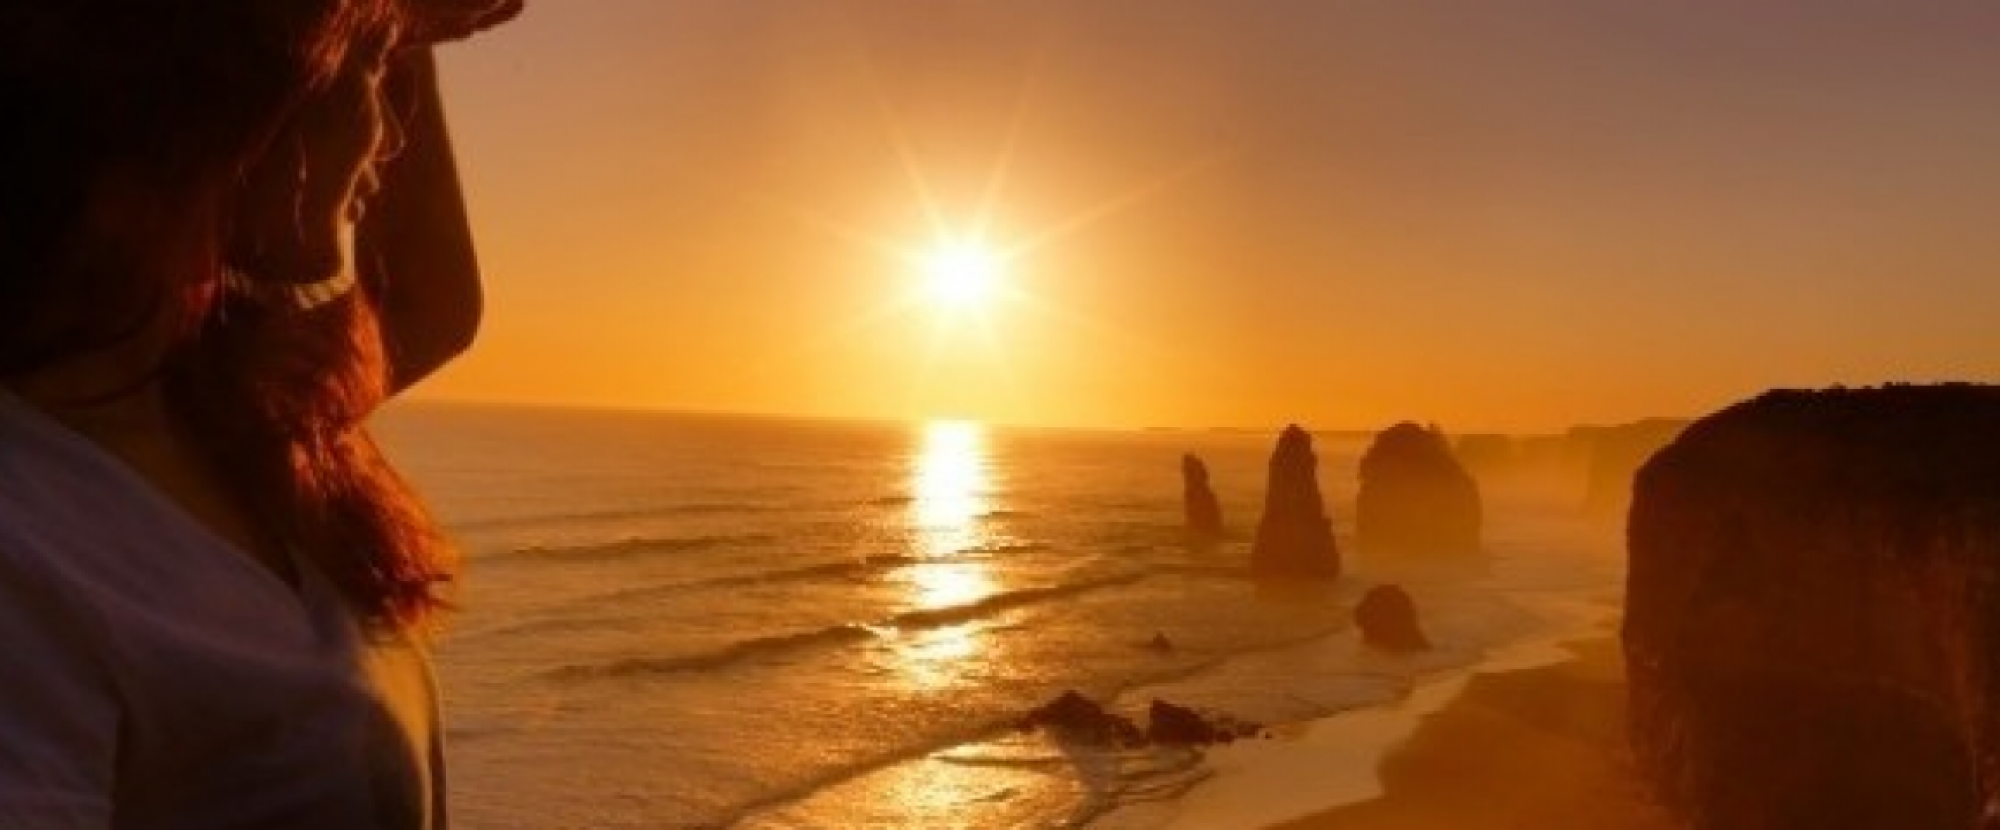 Melbourne - Great Ocean Road Sunset Tour (Small Group Tour) photo 893